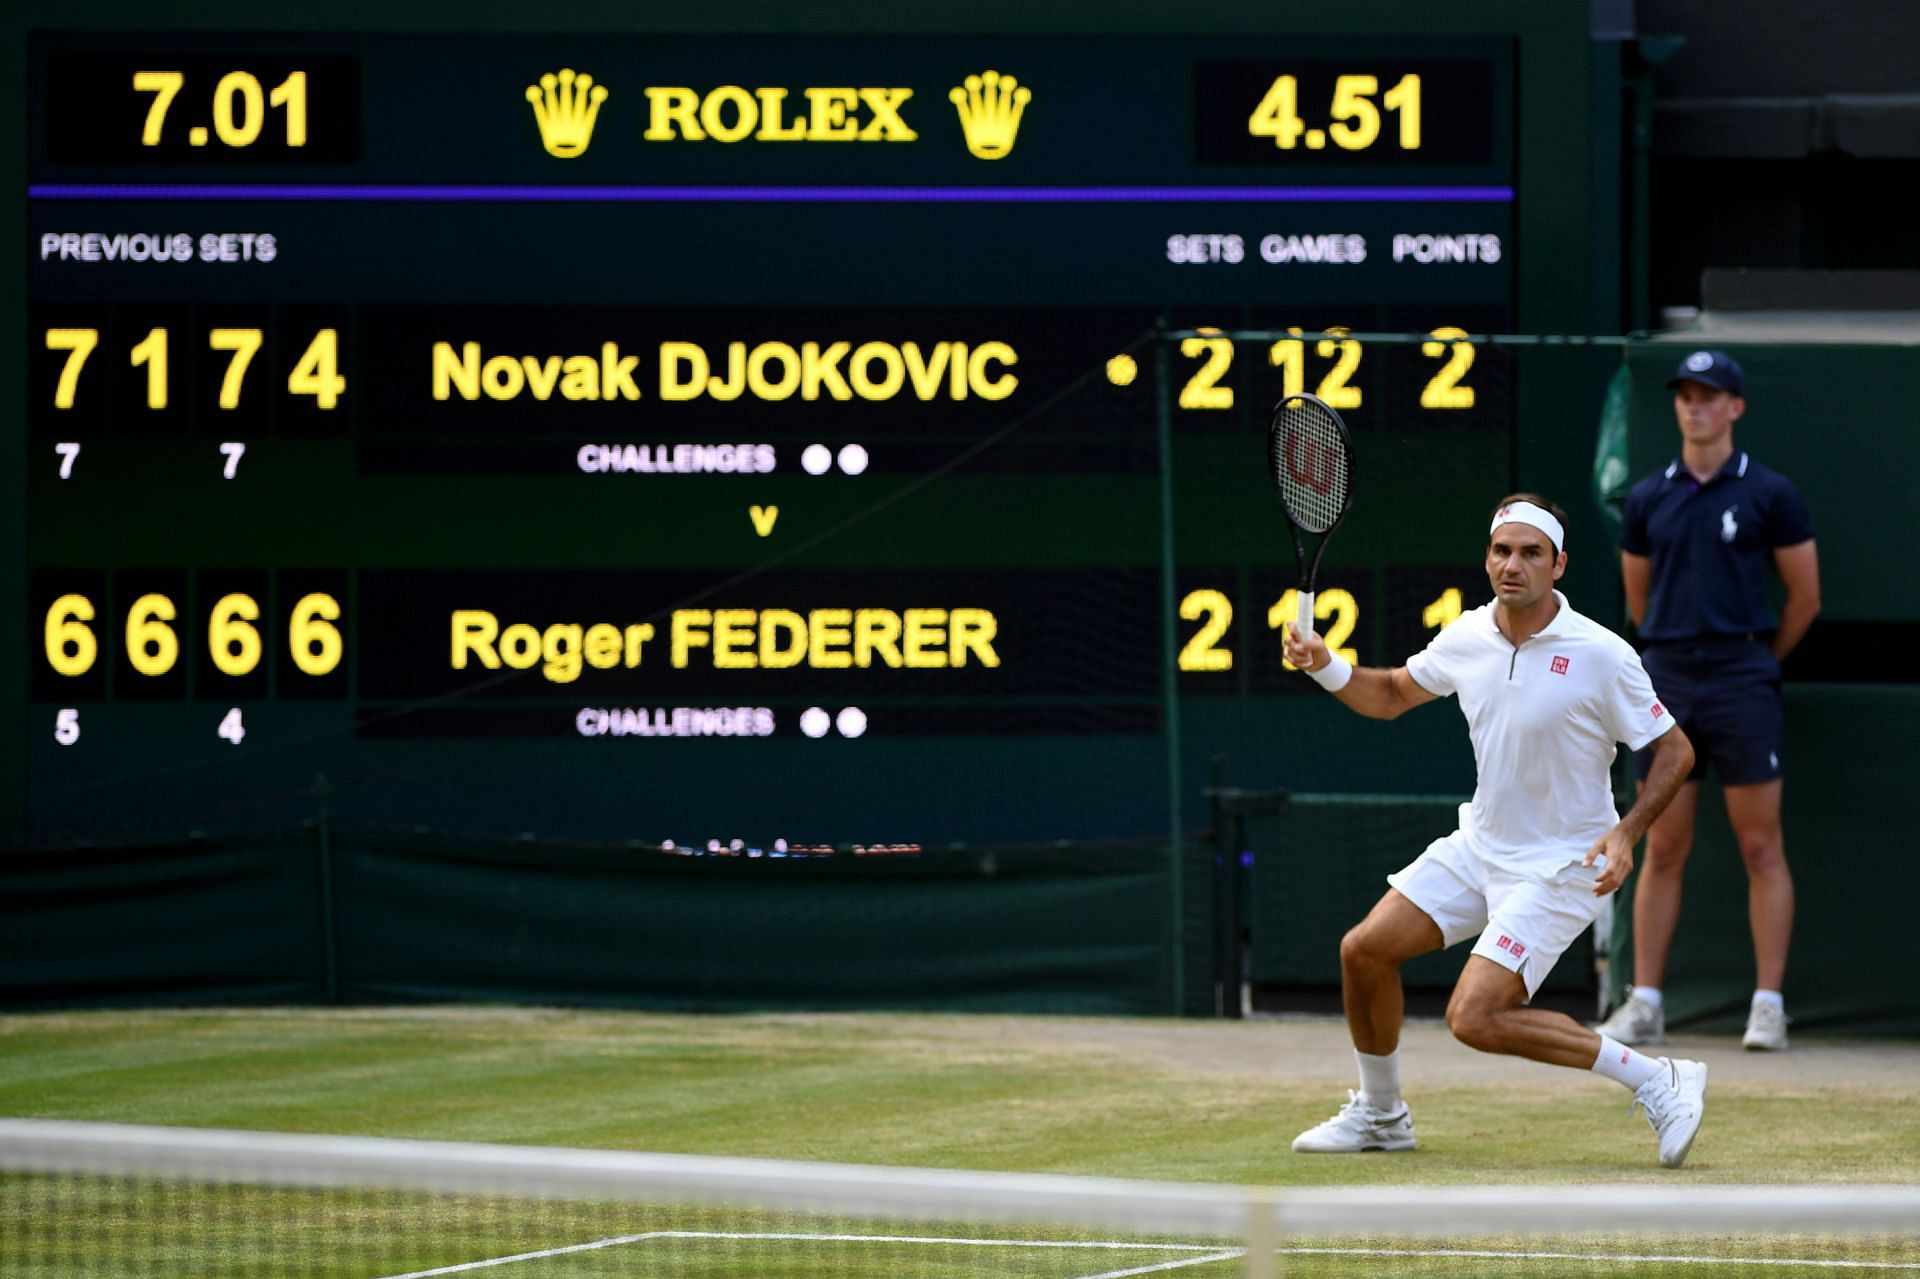 How tennis tie break and points scoring system work at Wimbledon